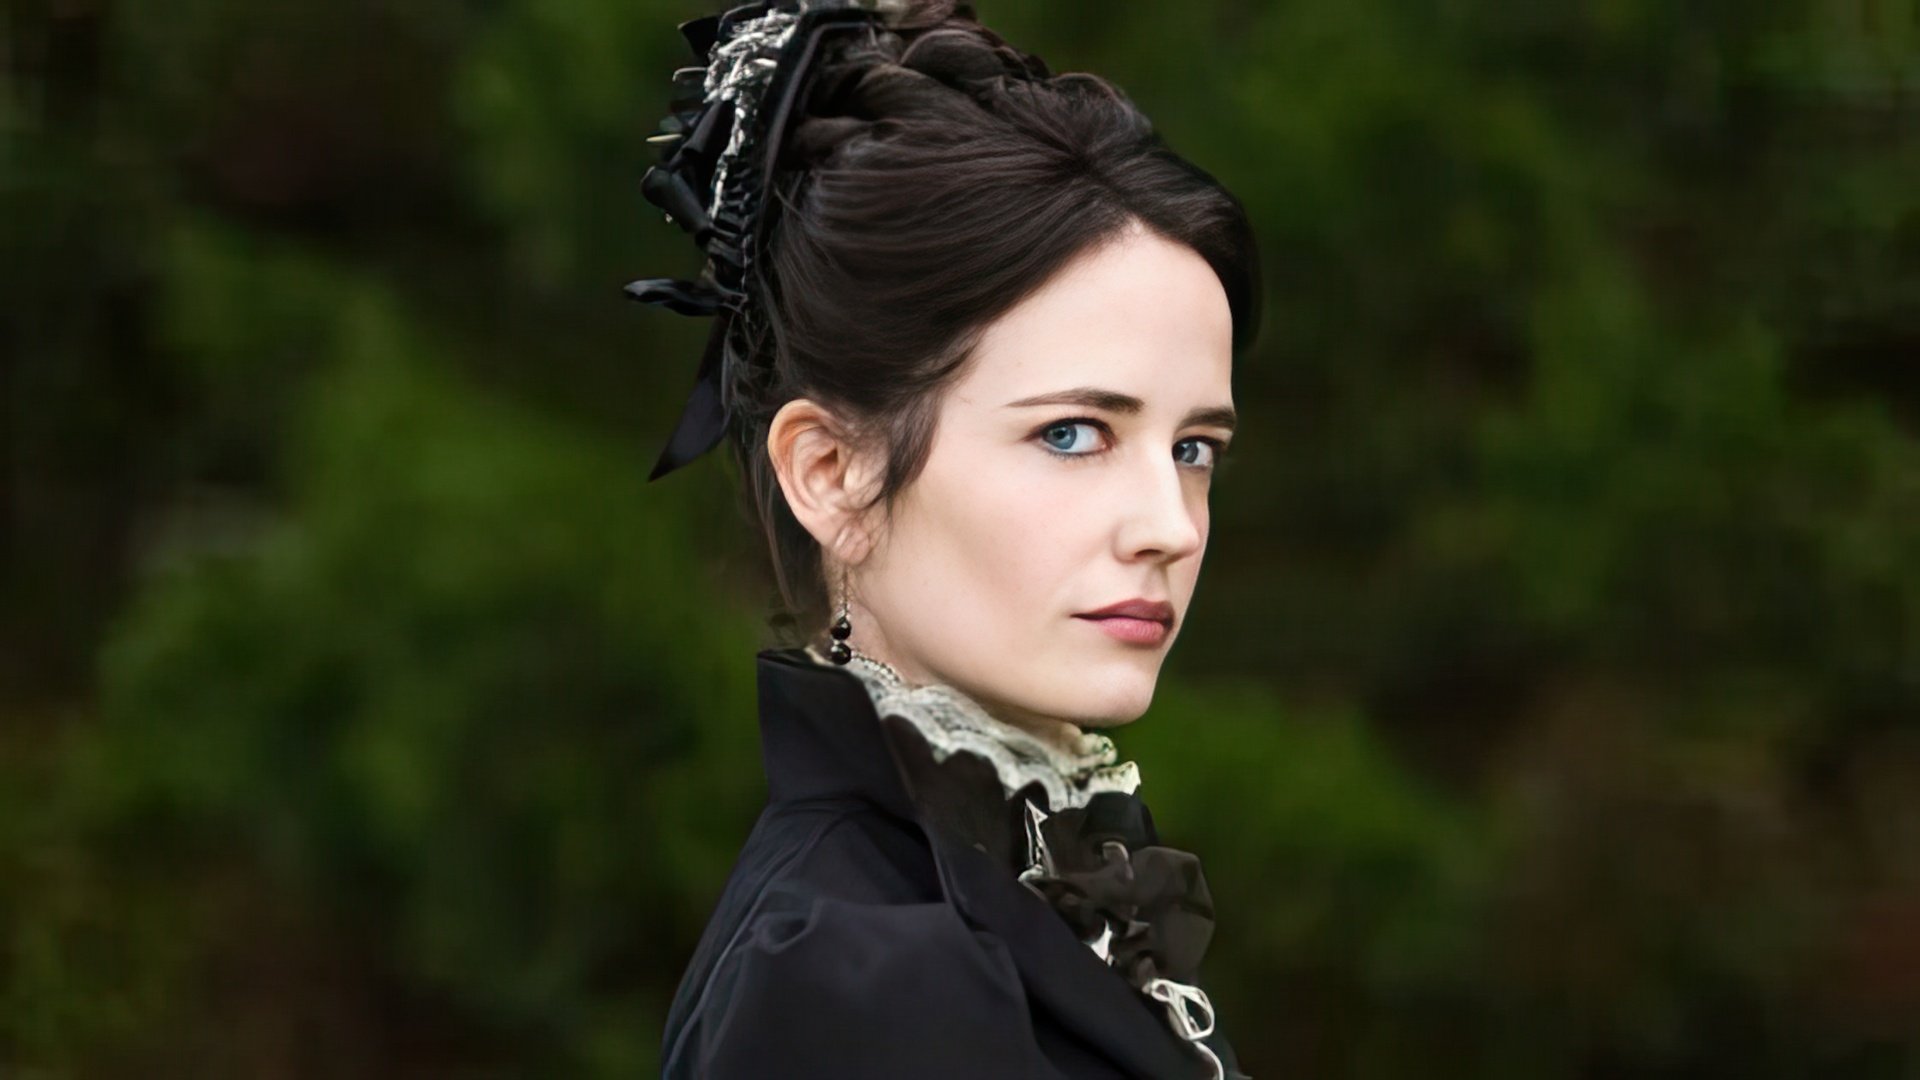 That’s why Eva Green likes costume movies